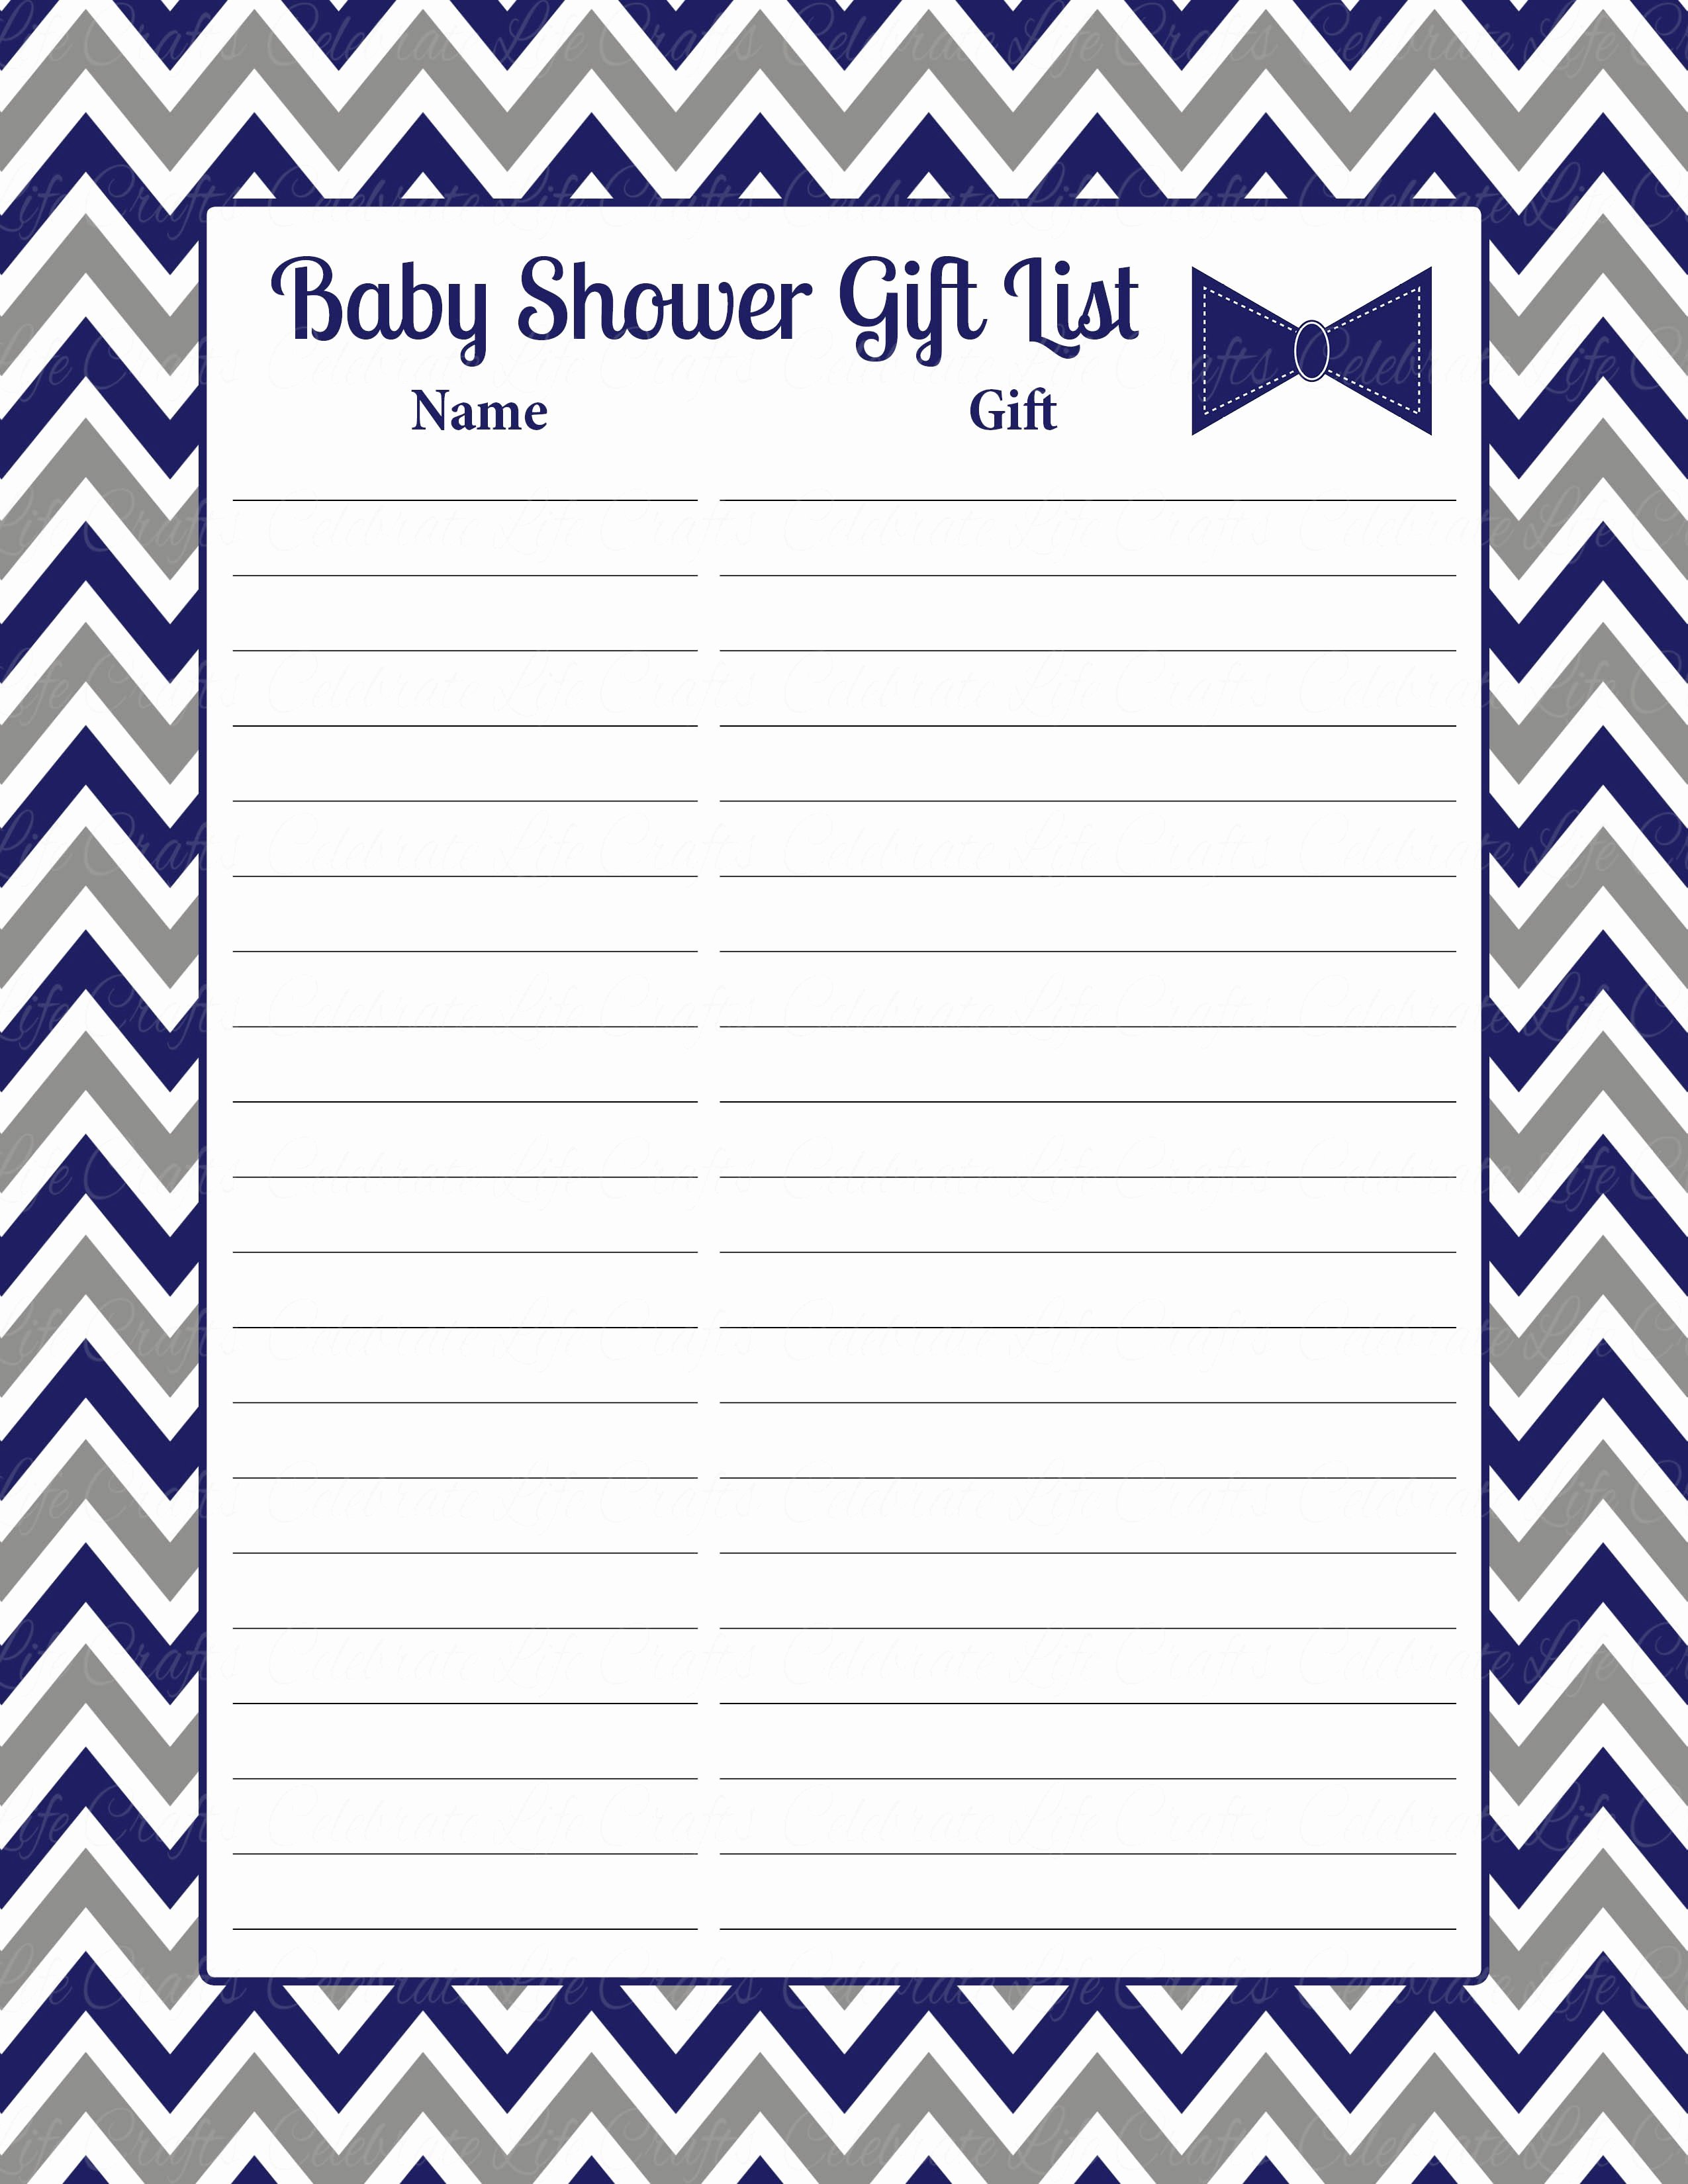 Baby Shower Gift Lists Awesome Baby Shower Gift List Little Man Baby Shower theme for